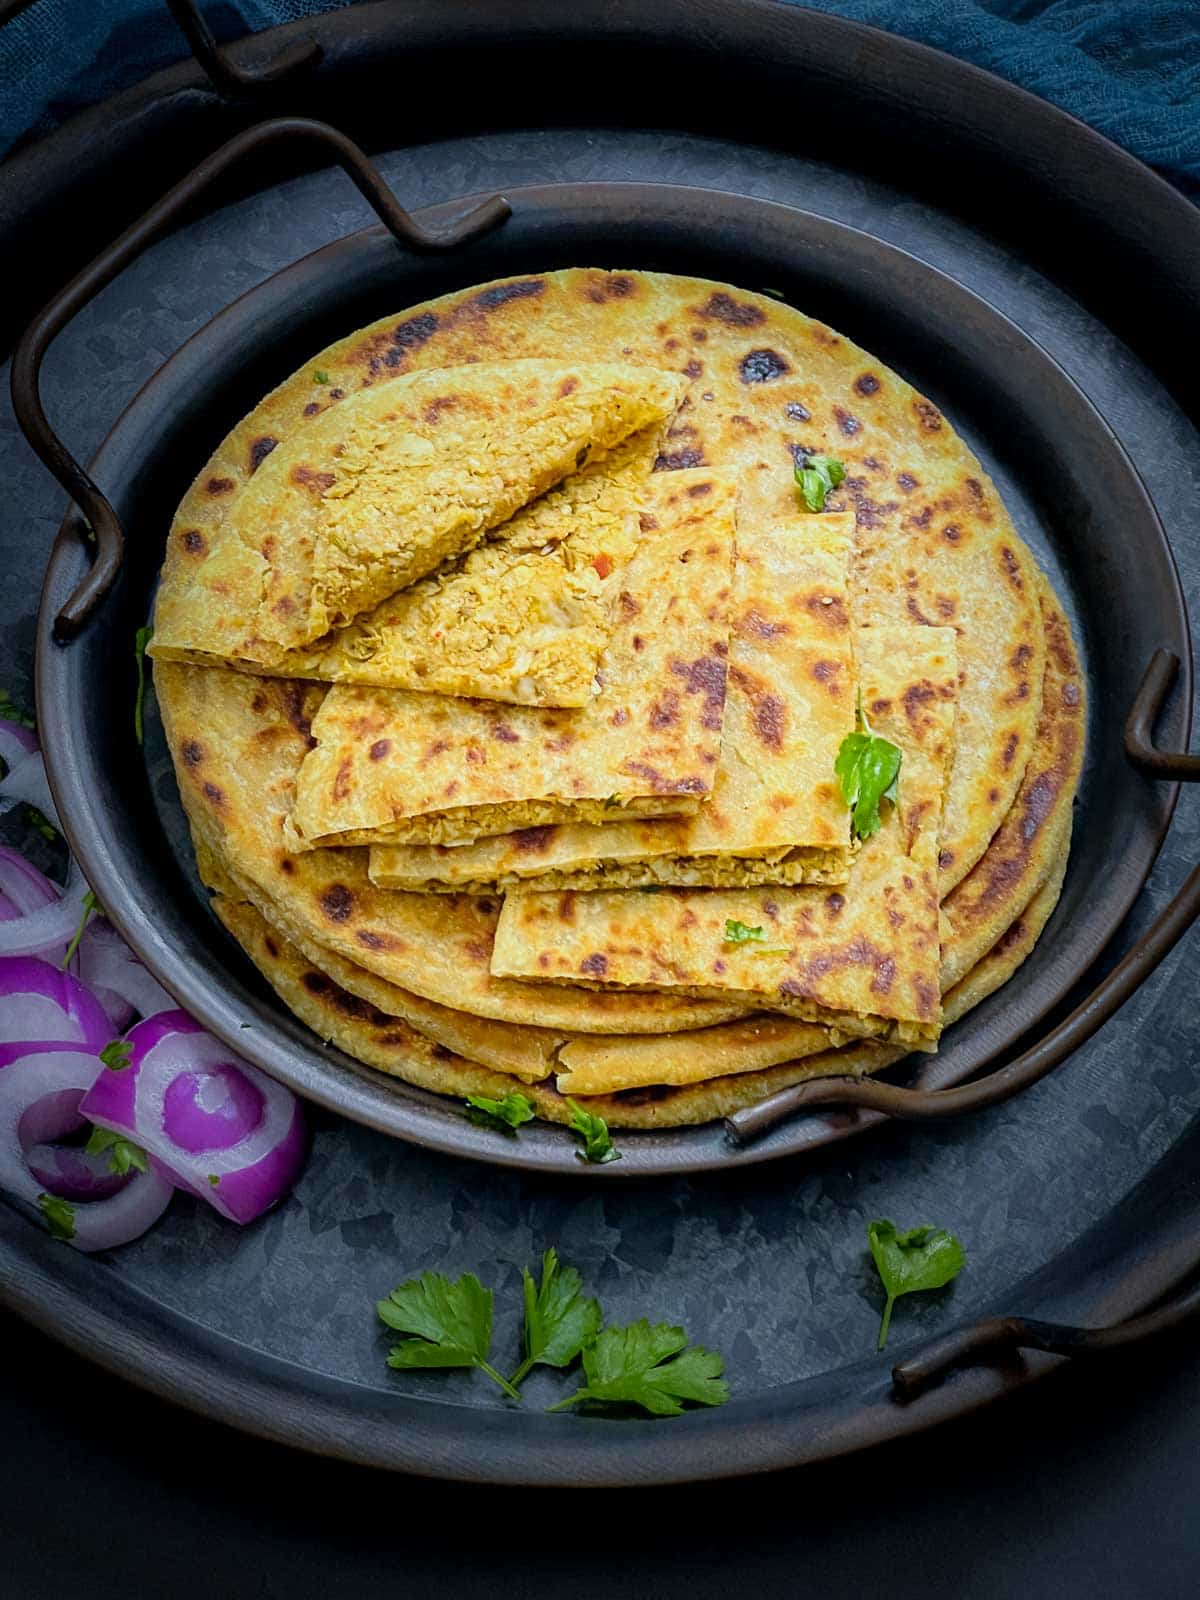 A piece of cut gobi paratha to show the filling inside.